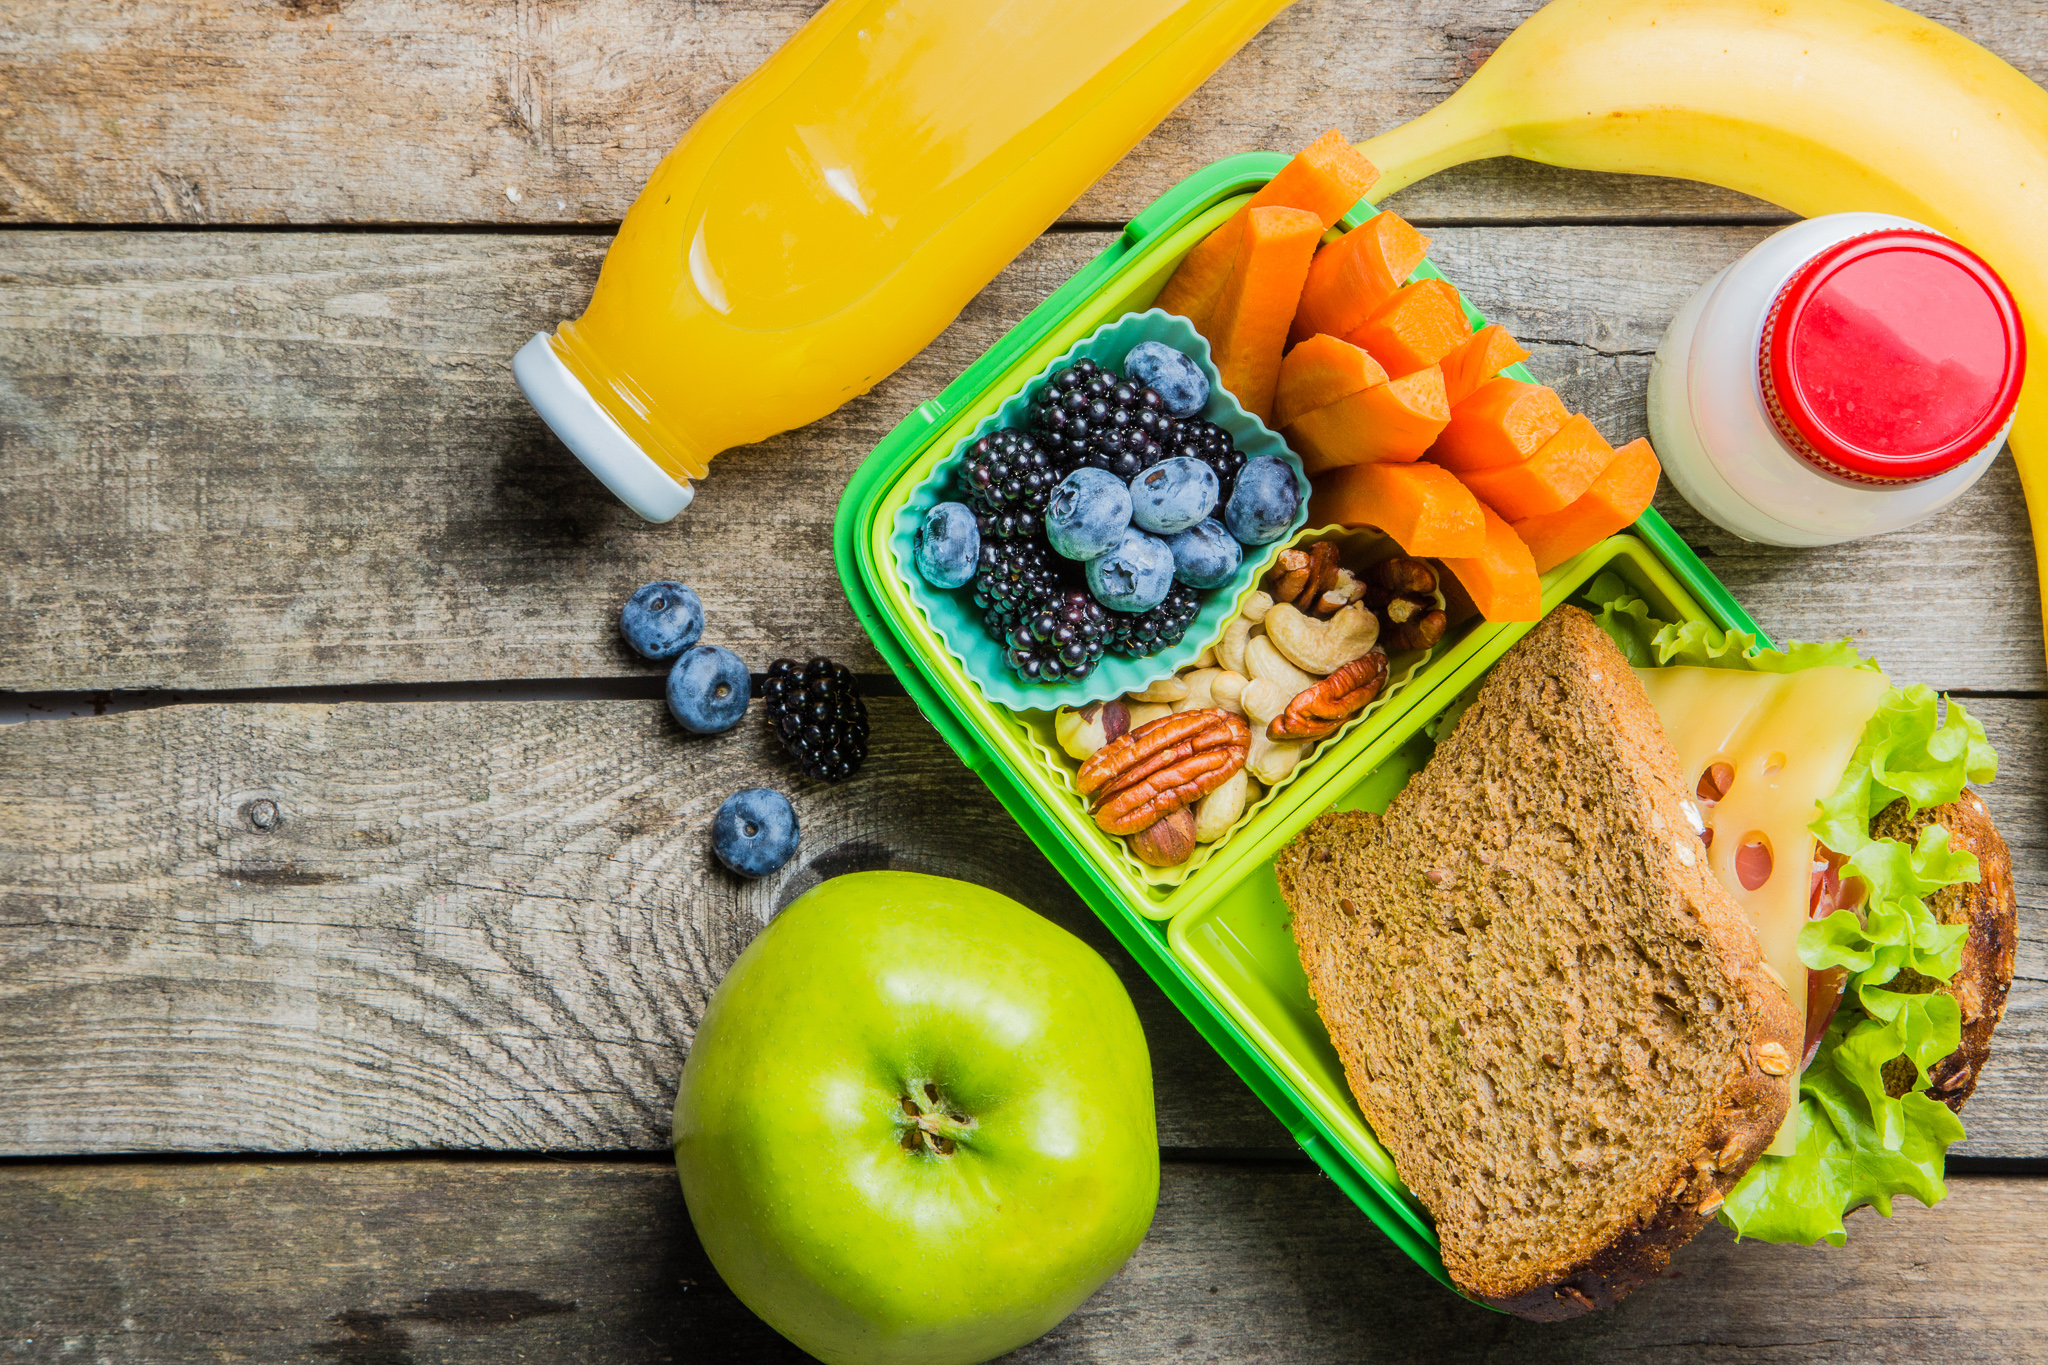 Building a Healthy Lunchbox